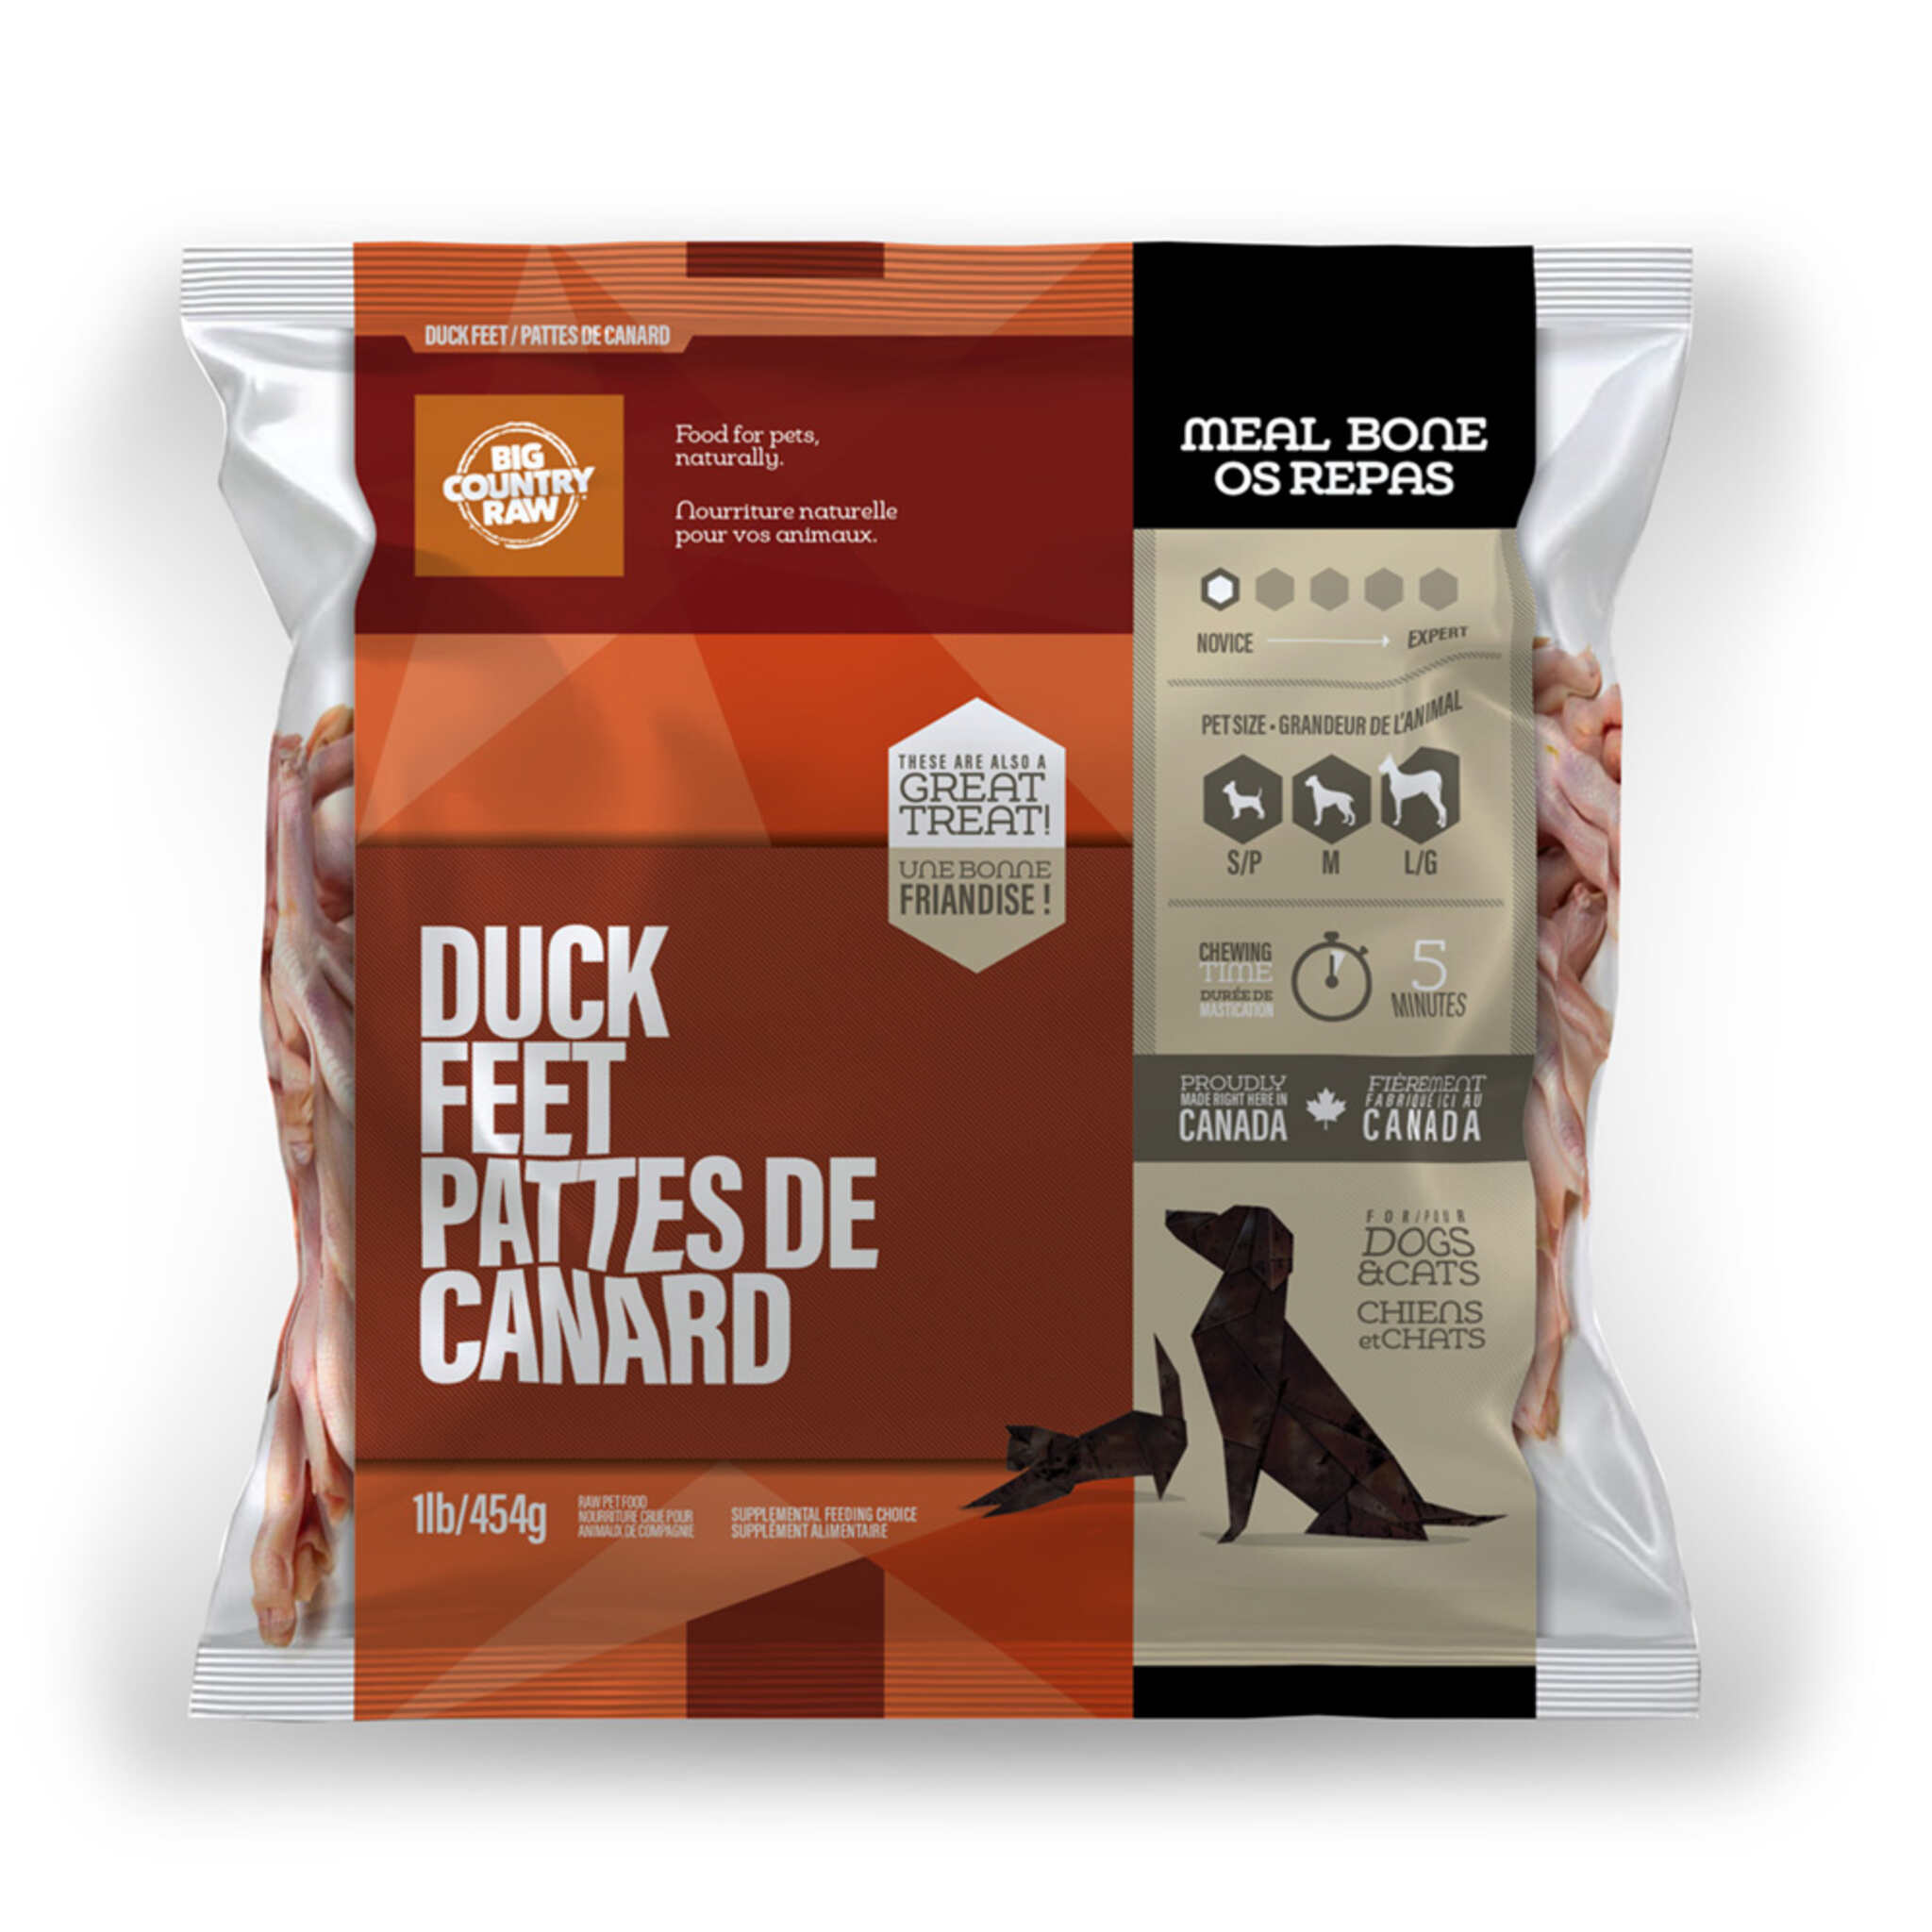 A bag of Big Country Raw Duck Feet, Cat or Dog treat, 1 lb, roughly 5 minutes chewing time per treat, requires freezing.